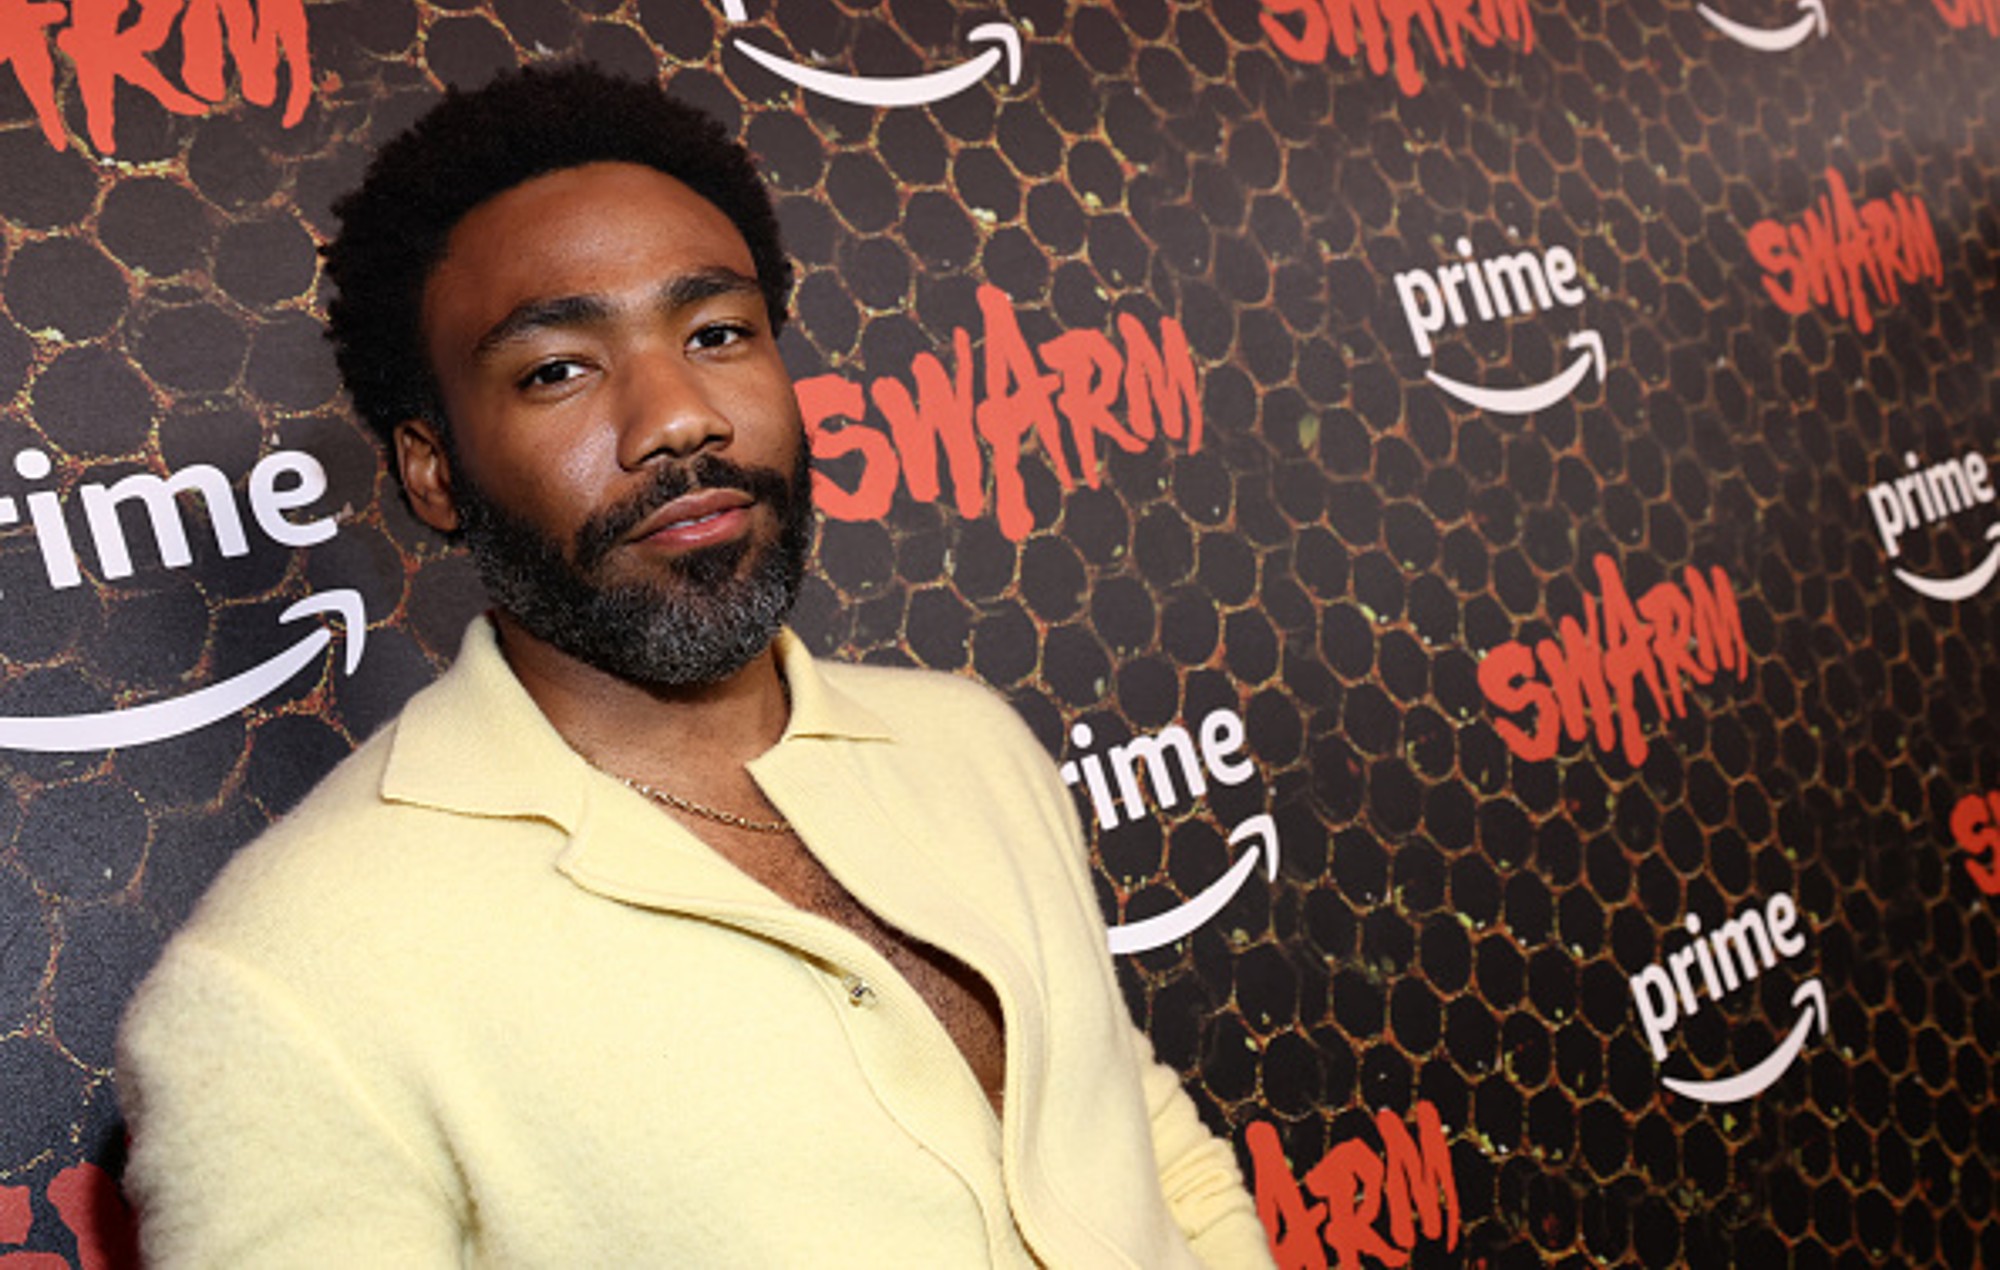 Hear new music from Childish Gambino in teasers for upcoming ‘Swarm’ series, co-created by Donald Glover